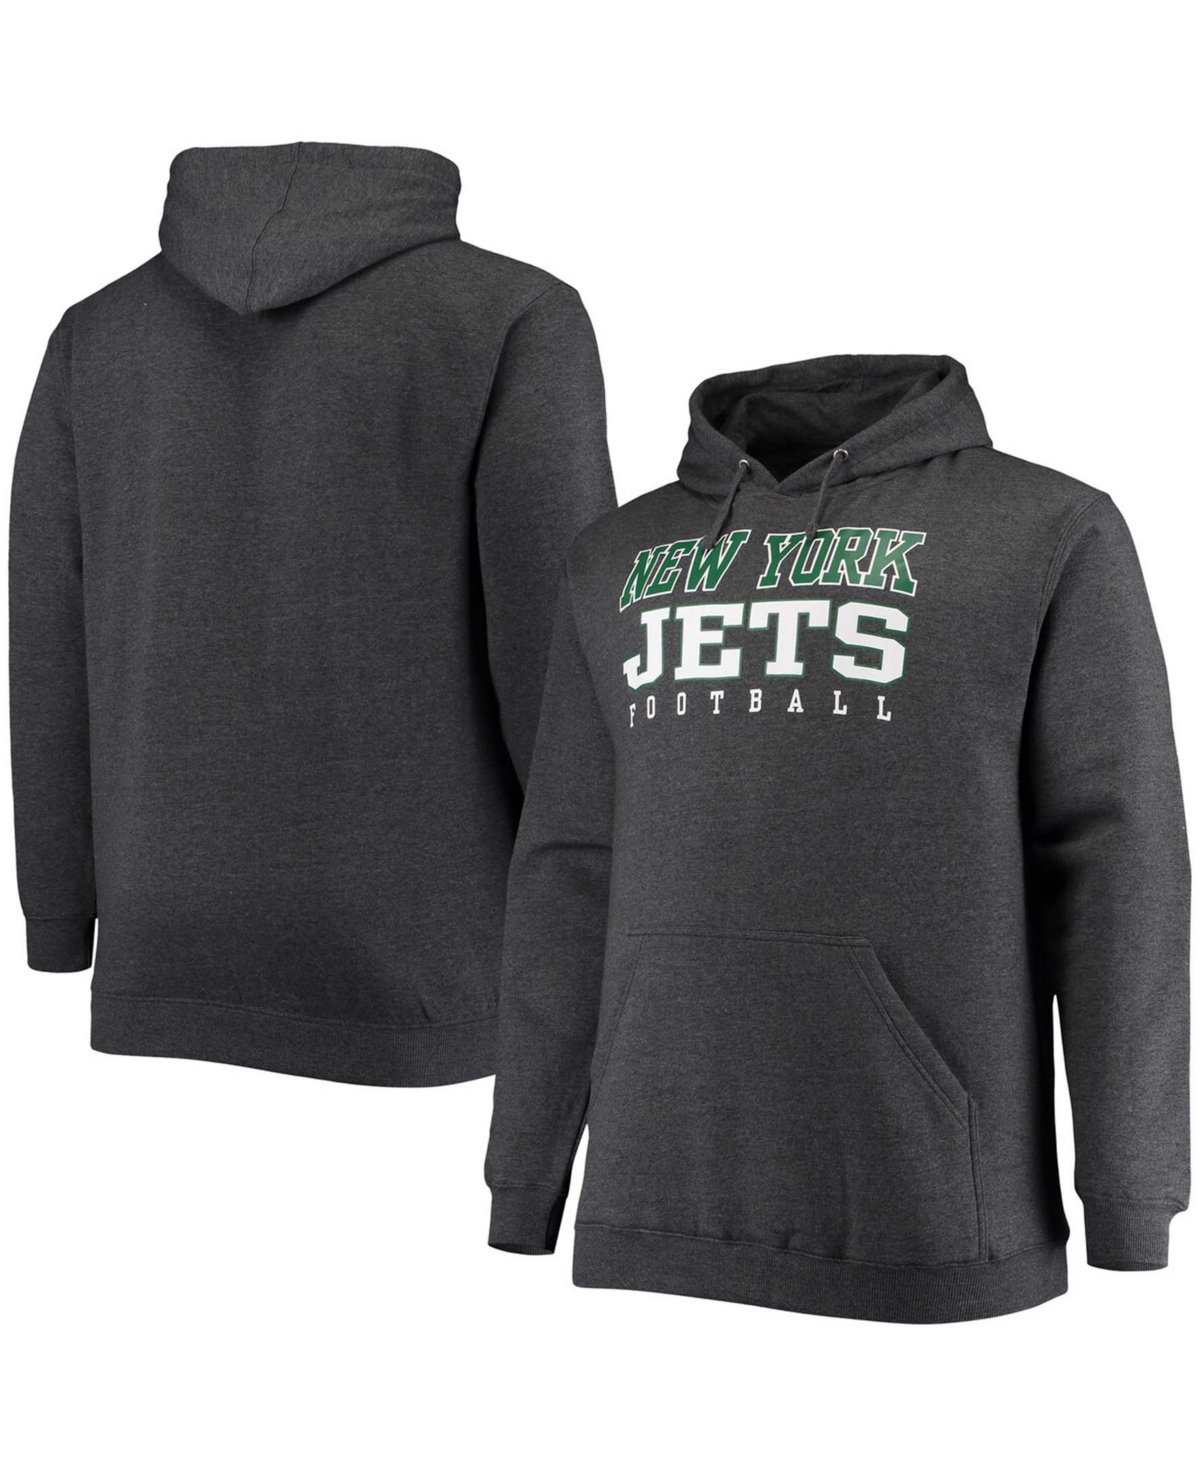 Fanatics Men's Big And Tall Heathered Charcoal New York Jets Practice Pullover Hoodie